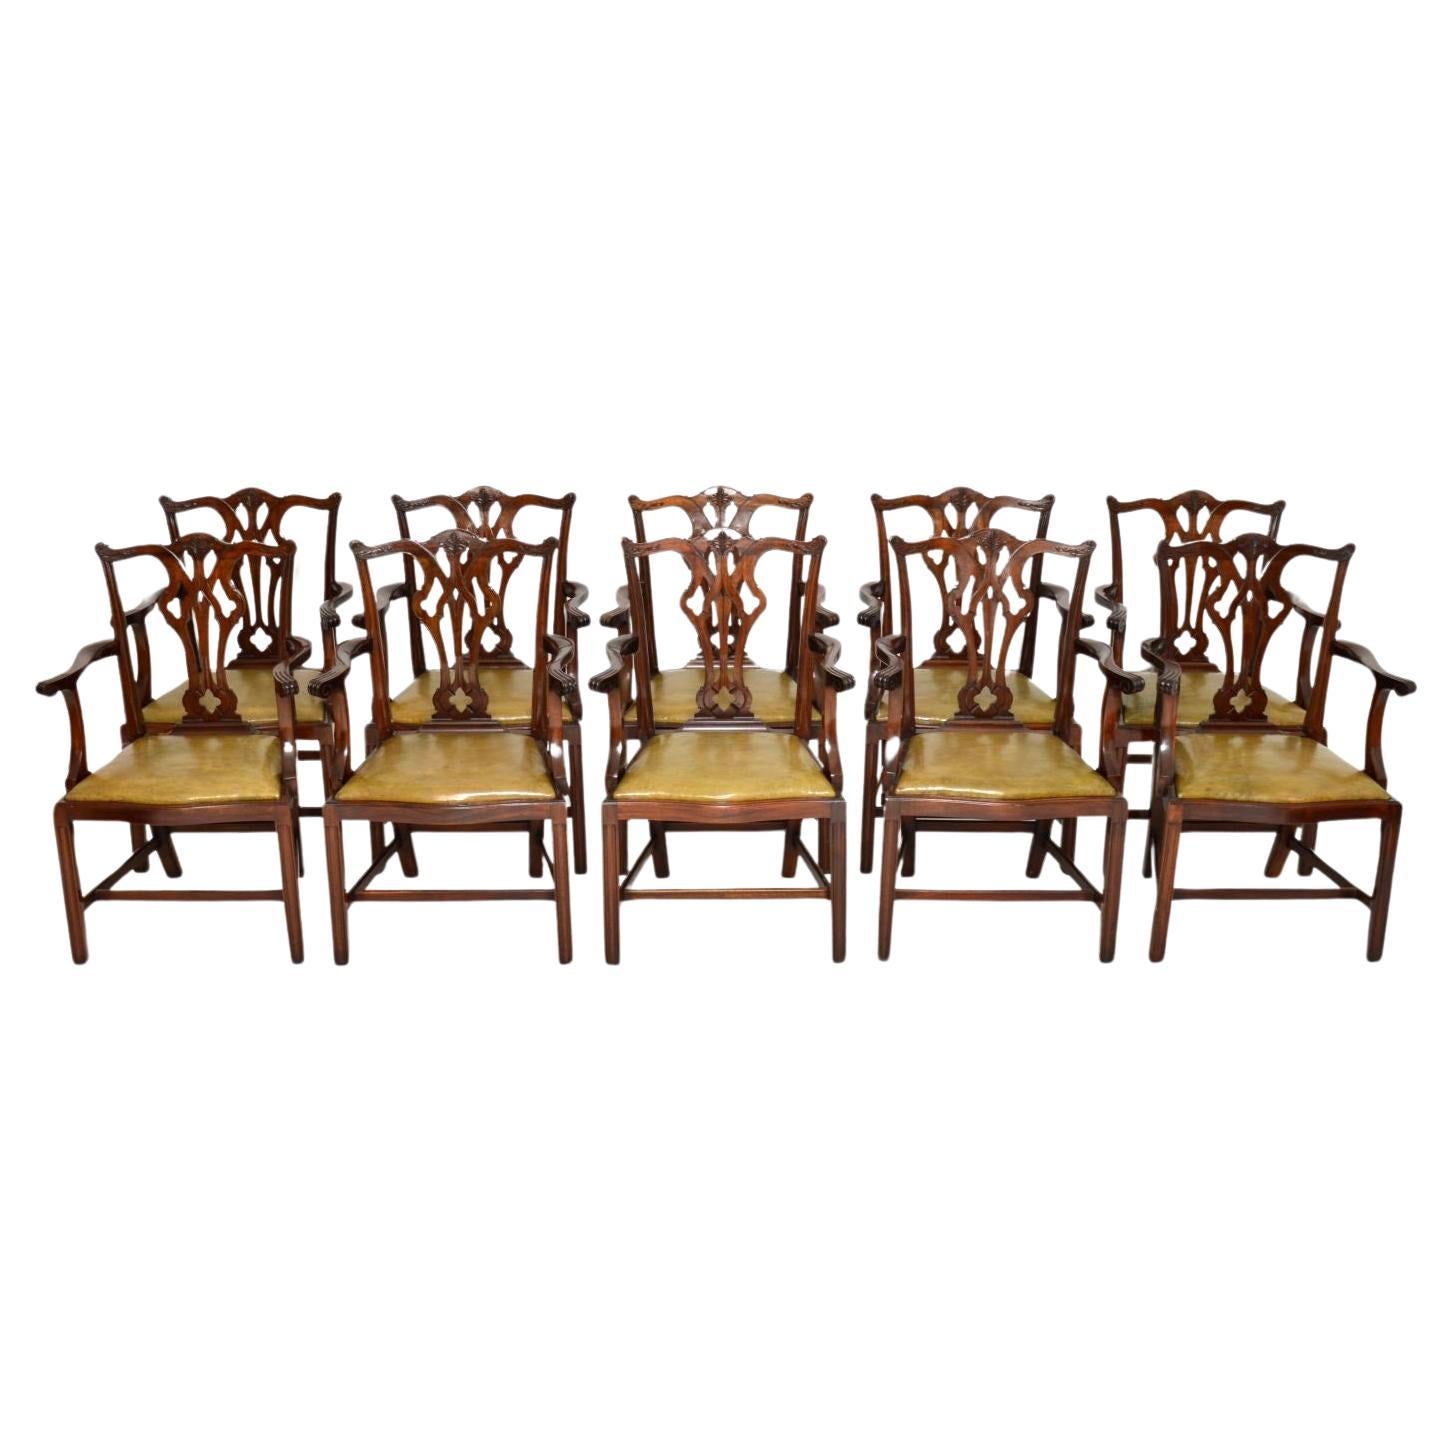 Set of 10 Antique Chippendale Carver Dining Chairs